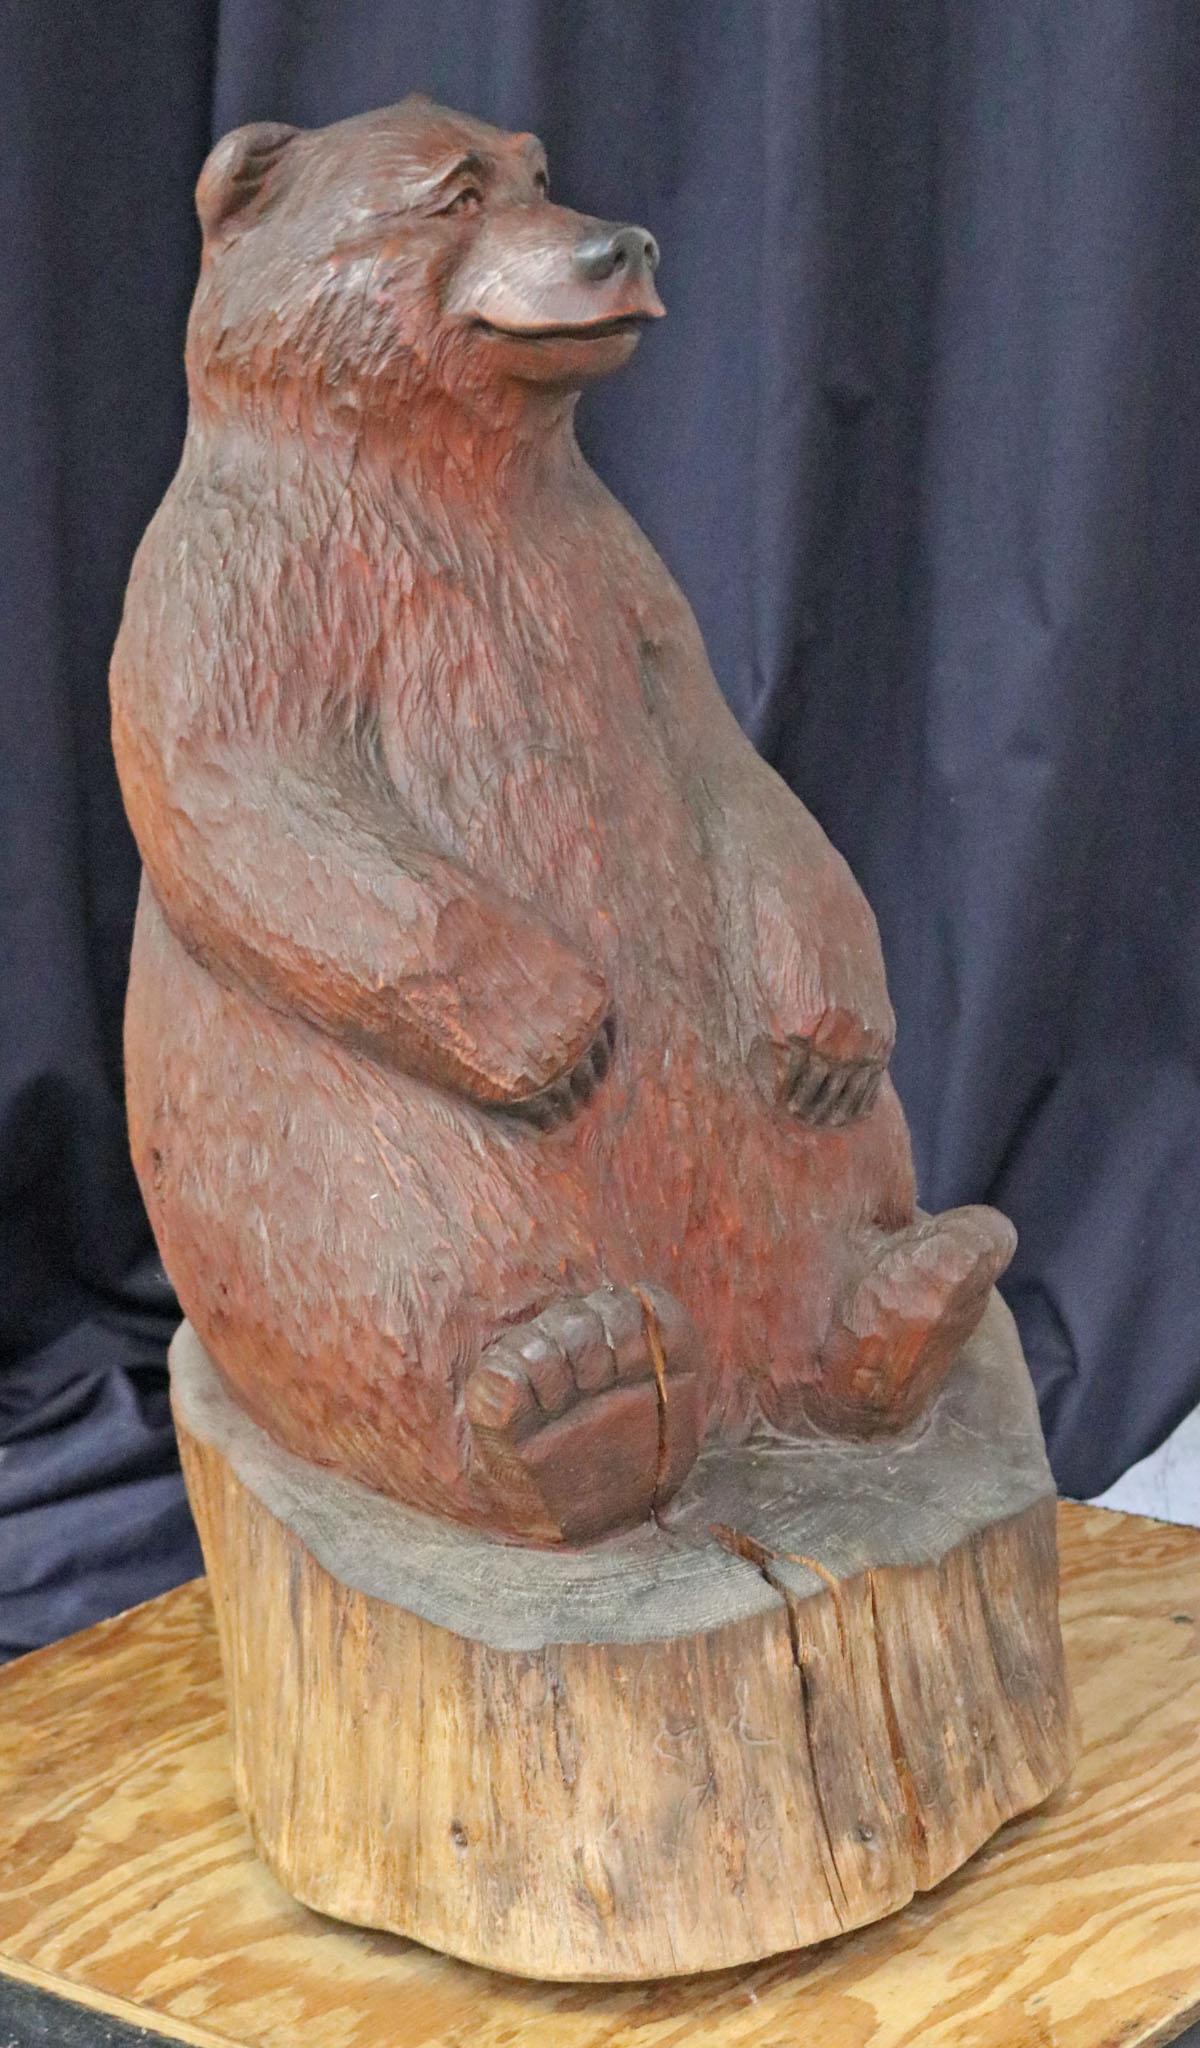 Hand Carved Wooden Bear "Fudd" by R. L. Blair